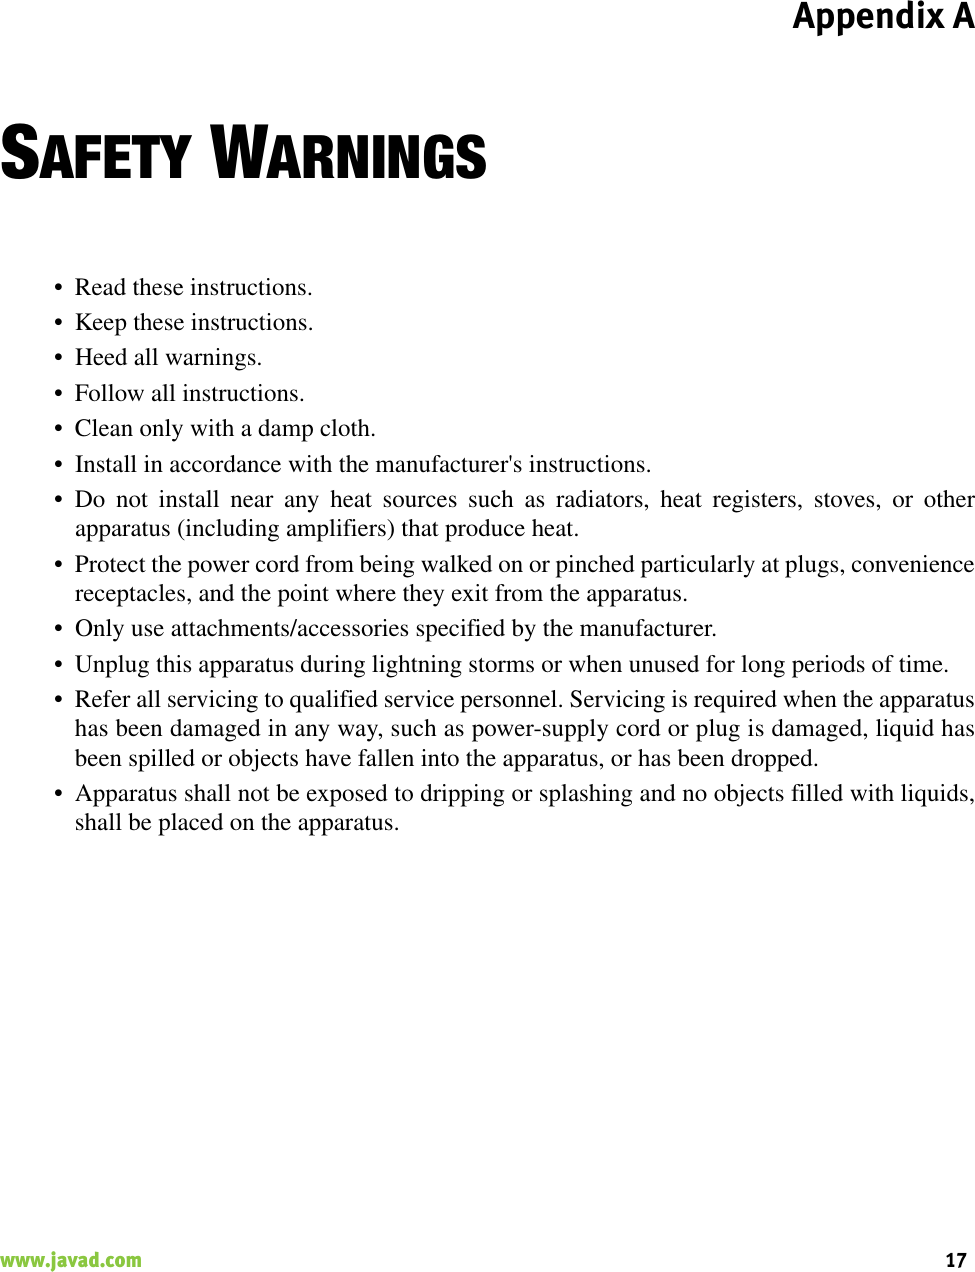 Appendix A17www.javad.com                                                                                                                                                    SAFETY WARNINGS• Read these instructions.• Keep these instructions.• Heed all warnings.• Follow all instructions.• Clean only with a damp cloth.• Install in accordance with the manufacturer&apos;s instructions.• Do not install near any heat sources such as radiators, heat registers, stoves, or otherapparatus (including amplifiers) that produce heat.• Protect the power cord from being walked on or pinched particularly at plugs, conveniencereceptacles, and the point where they exit from the apparatus.• Only use attachments/accessories specified by the manufacturer.• Unplug this apparatus during lightning storms or when unused for long periods of time.• Refer all servicing to qualified service personnel. Servicing is required when the apparatushas been damaged in any way, such as power-supply cord or plug is damaged, liquid hasbeen spilled or objects have fallen into the apparatus, or has been dropped.• Apparatus shall not be exposed to dripping or splashing and no objects filled with liquids,shall be placed on the apparatus.